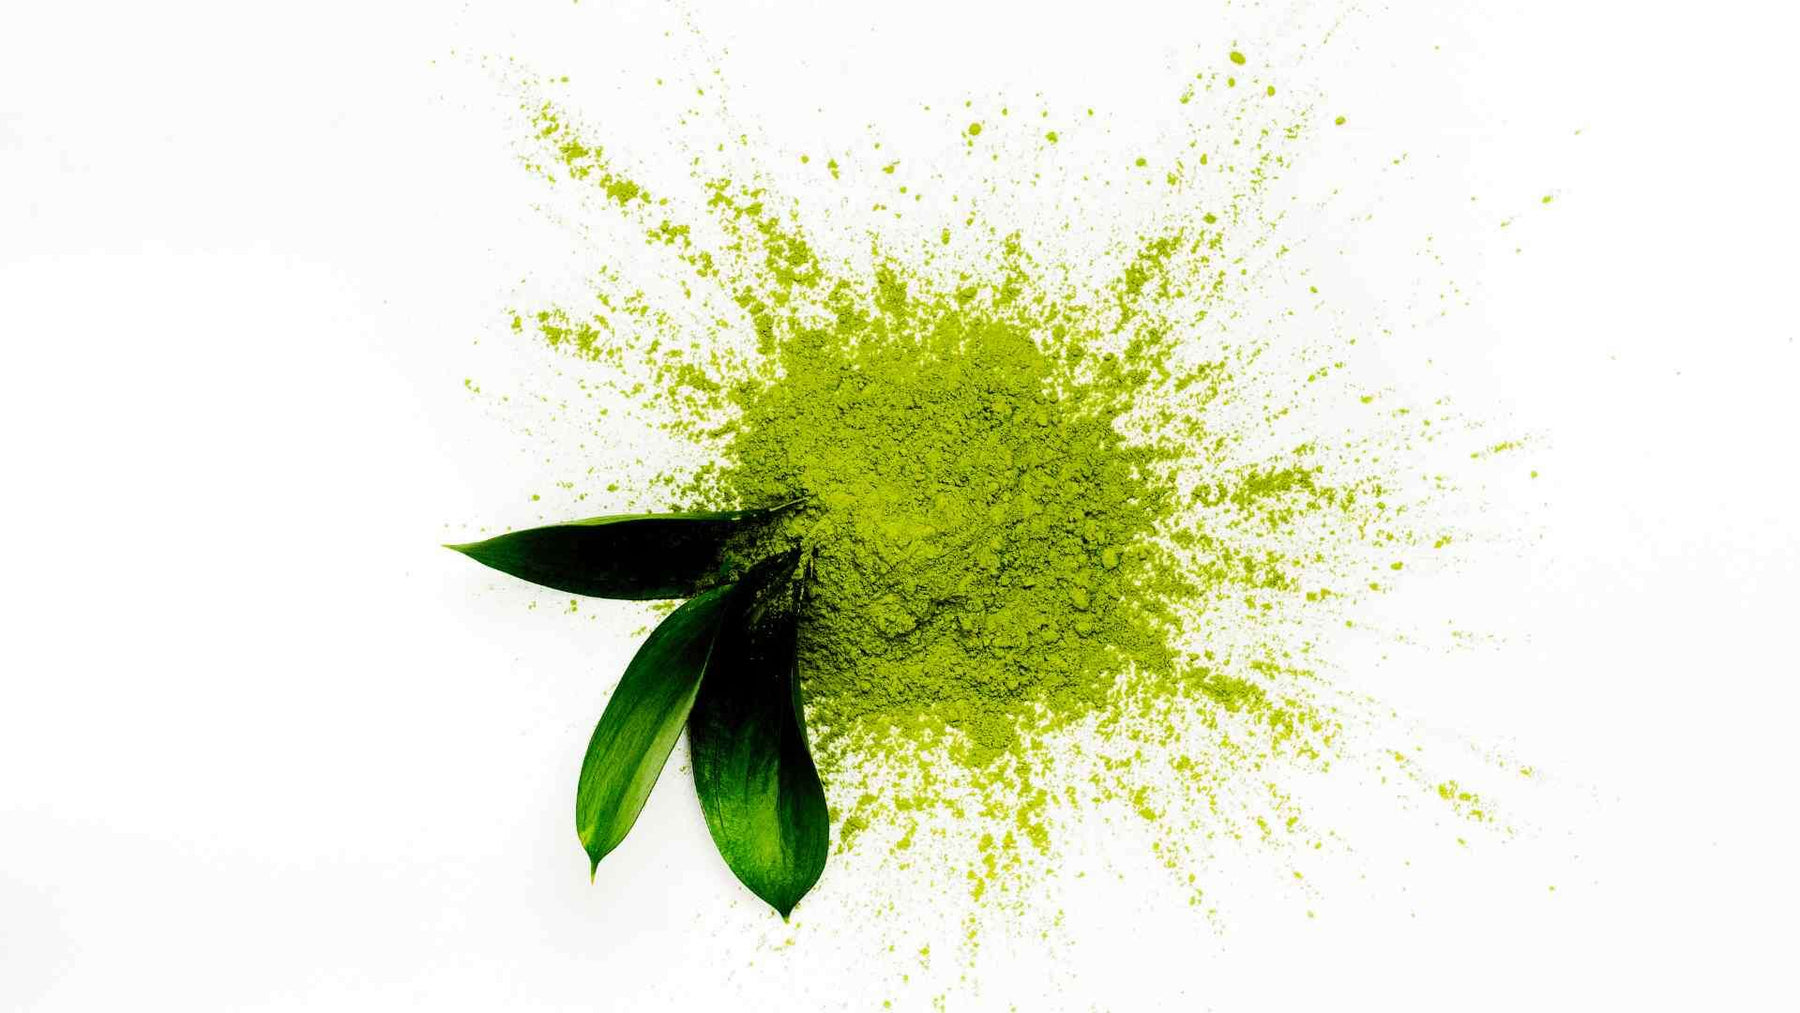 Matcha Madness: Green Tea Powder’s Impact on Concentration in UK